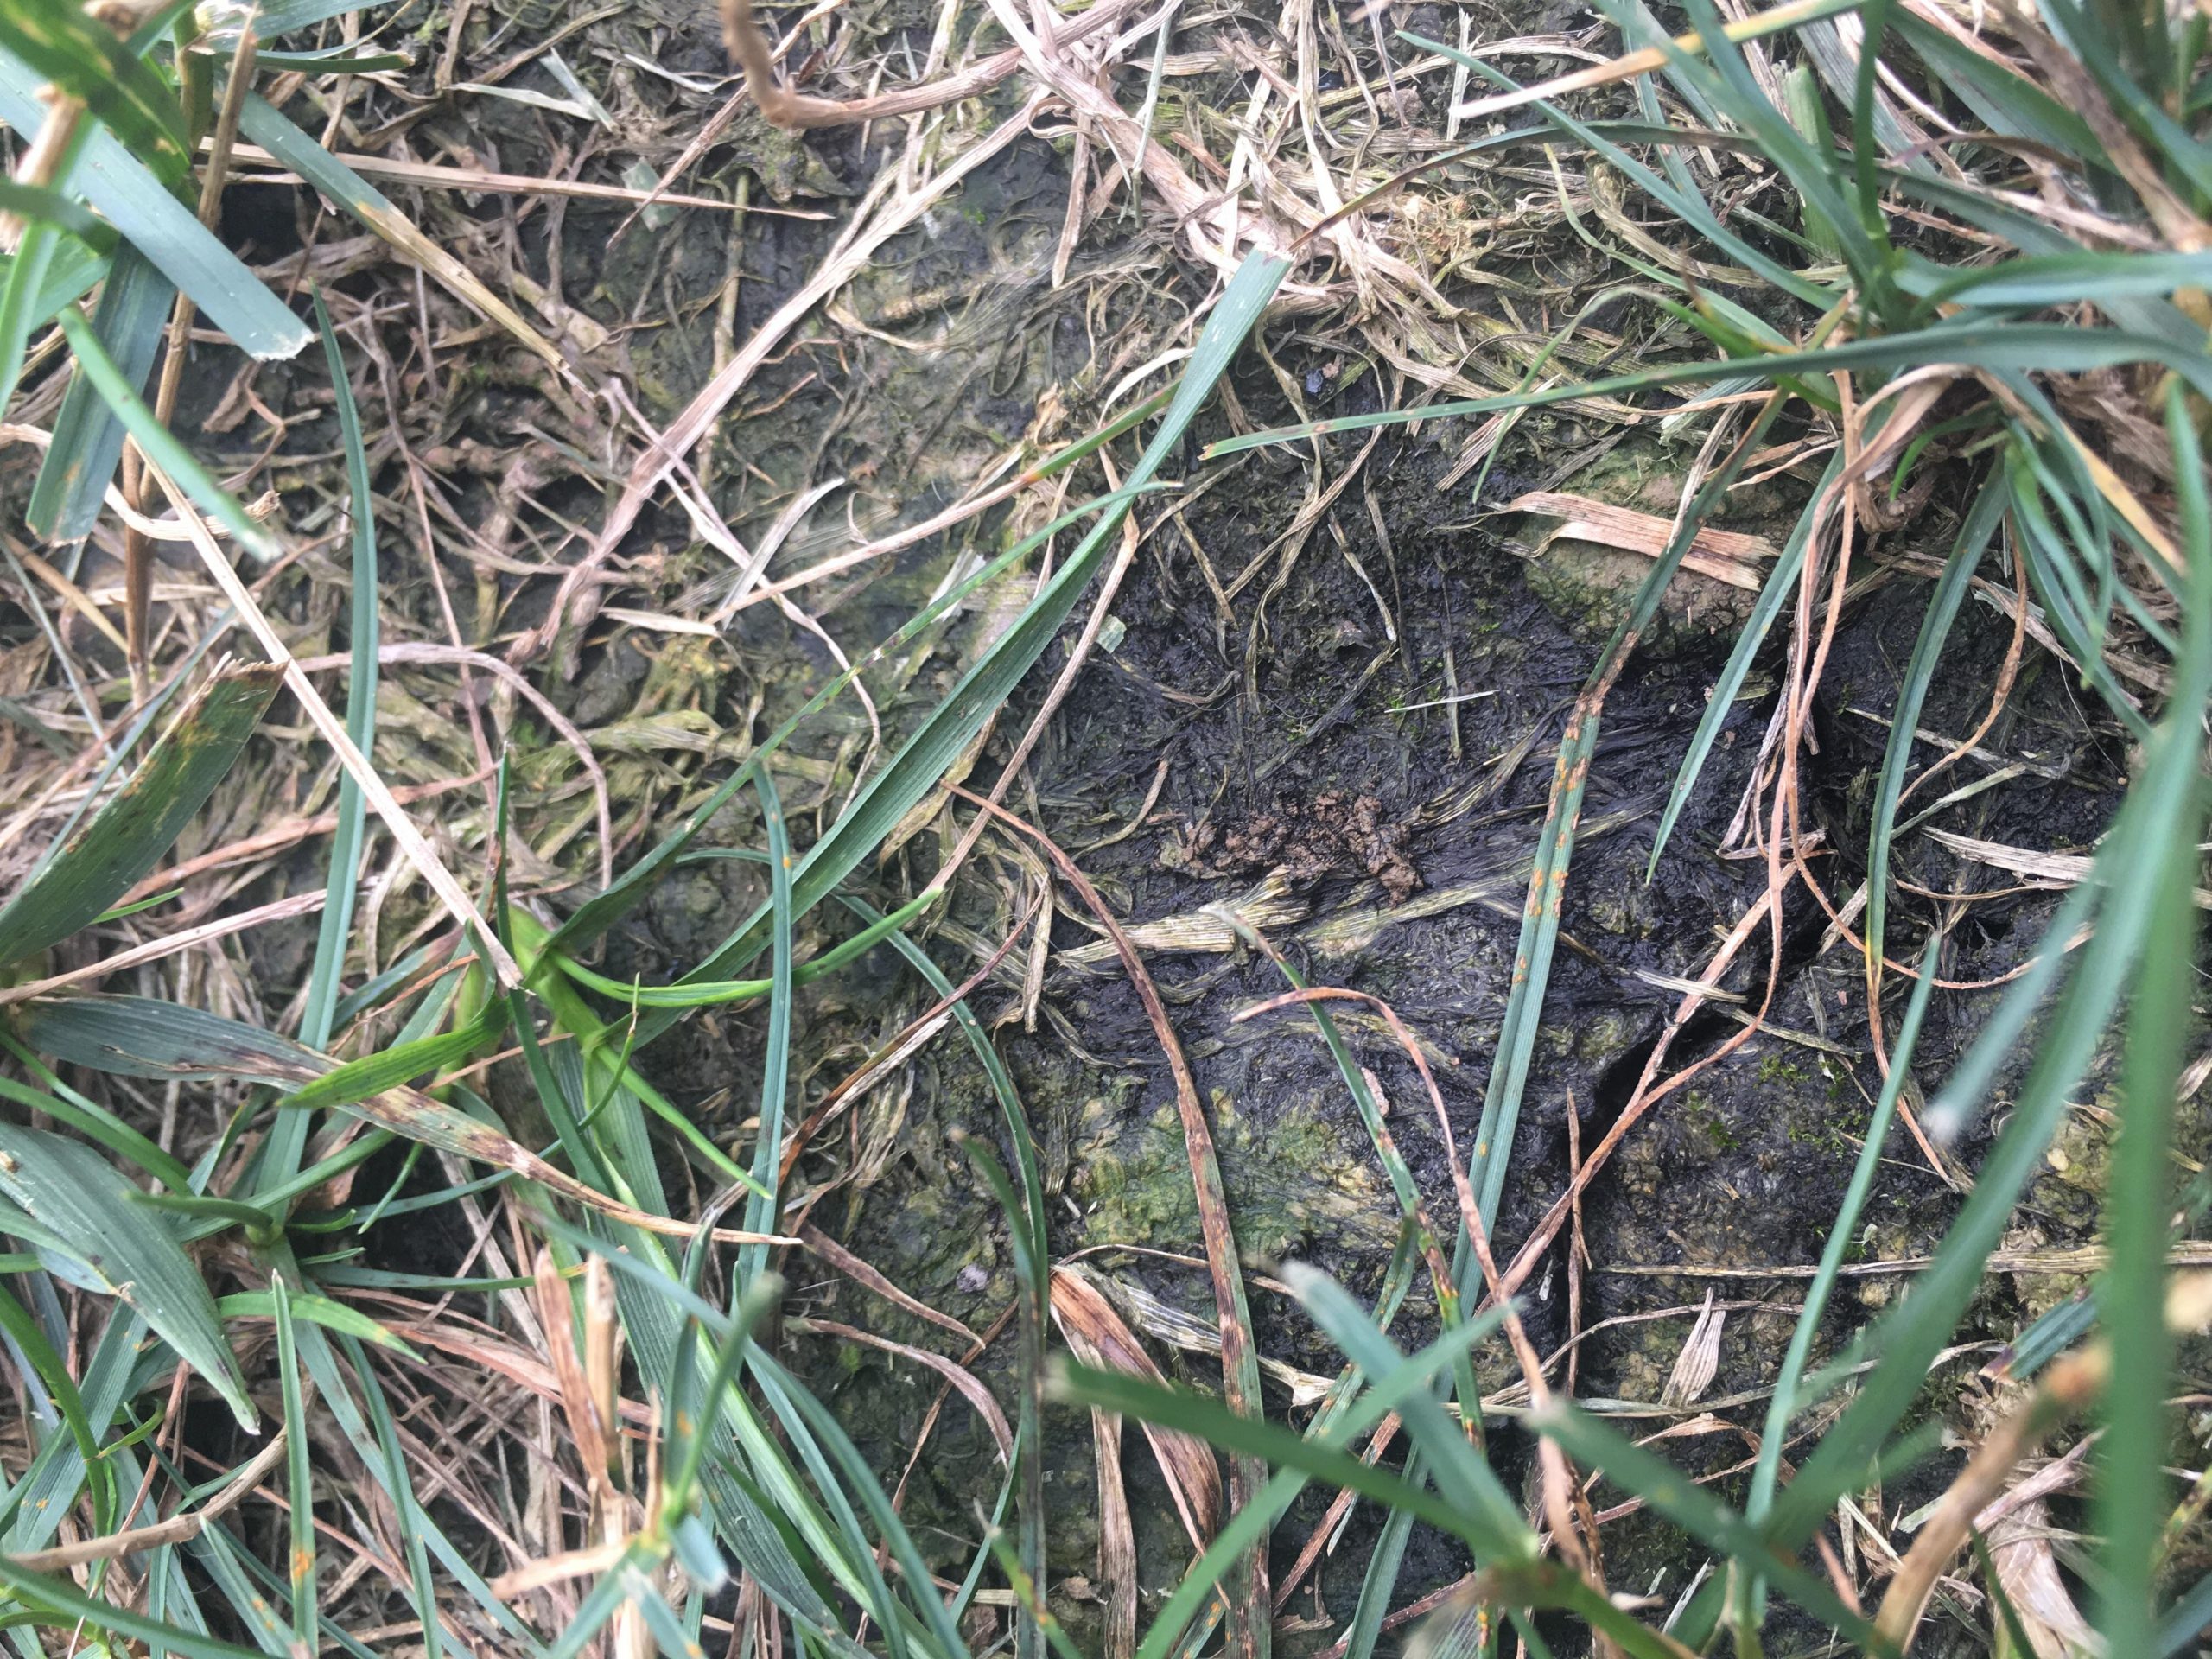 Black looking mold(?) found in my lawn. What is this, is ...